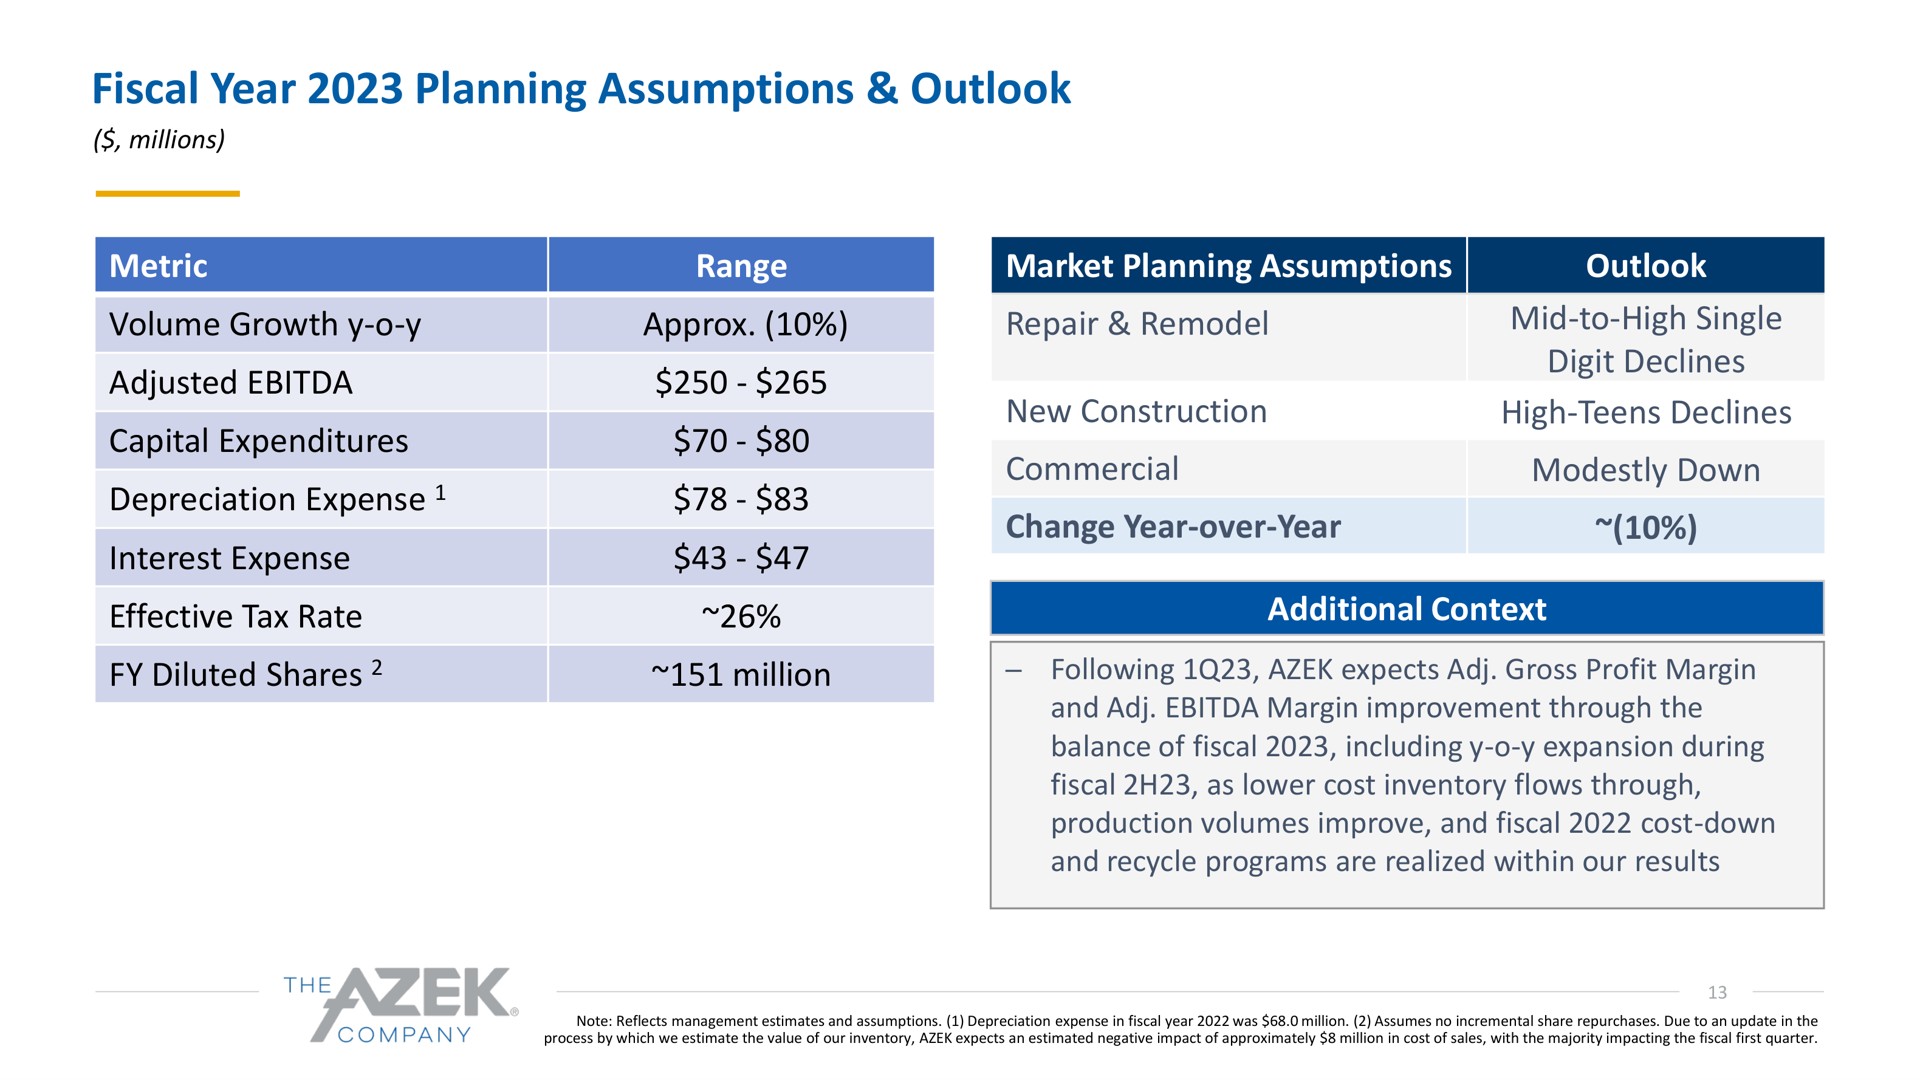 fiscal year planning assumptions outlook volume growth adjusted capital expenditures depreciation expense interest expense effective tax rate repair remodel mid to high single digit declines change year over year additional context | Azek